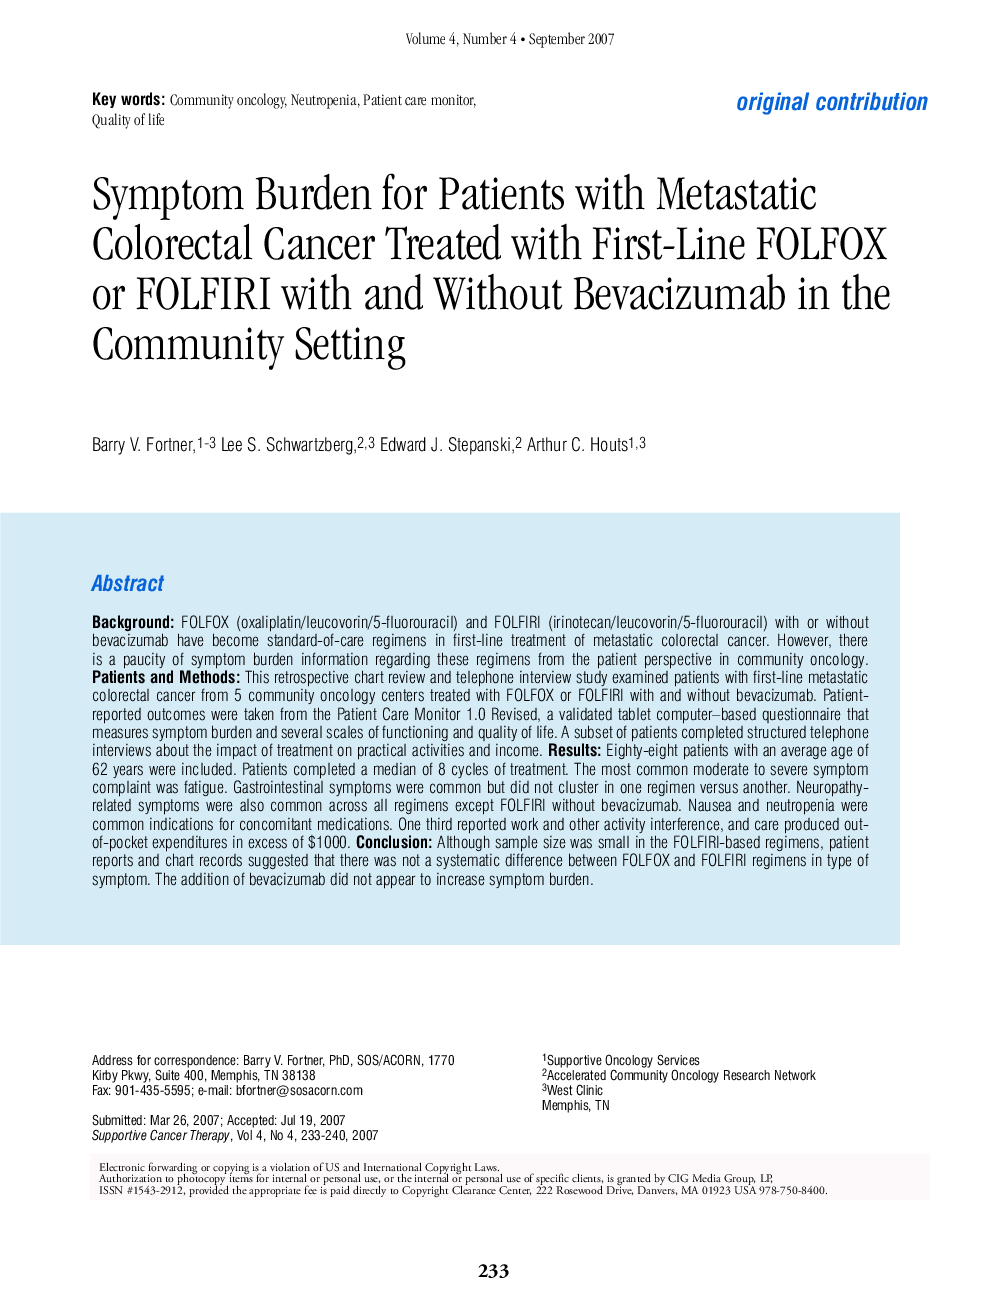 Symptom Burden for Patients with Metastatic Colorectal Cancer Treated with First-Line FOLFOX or FOLFIRI with and Without Bevacizumab in the Community Setting